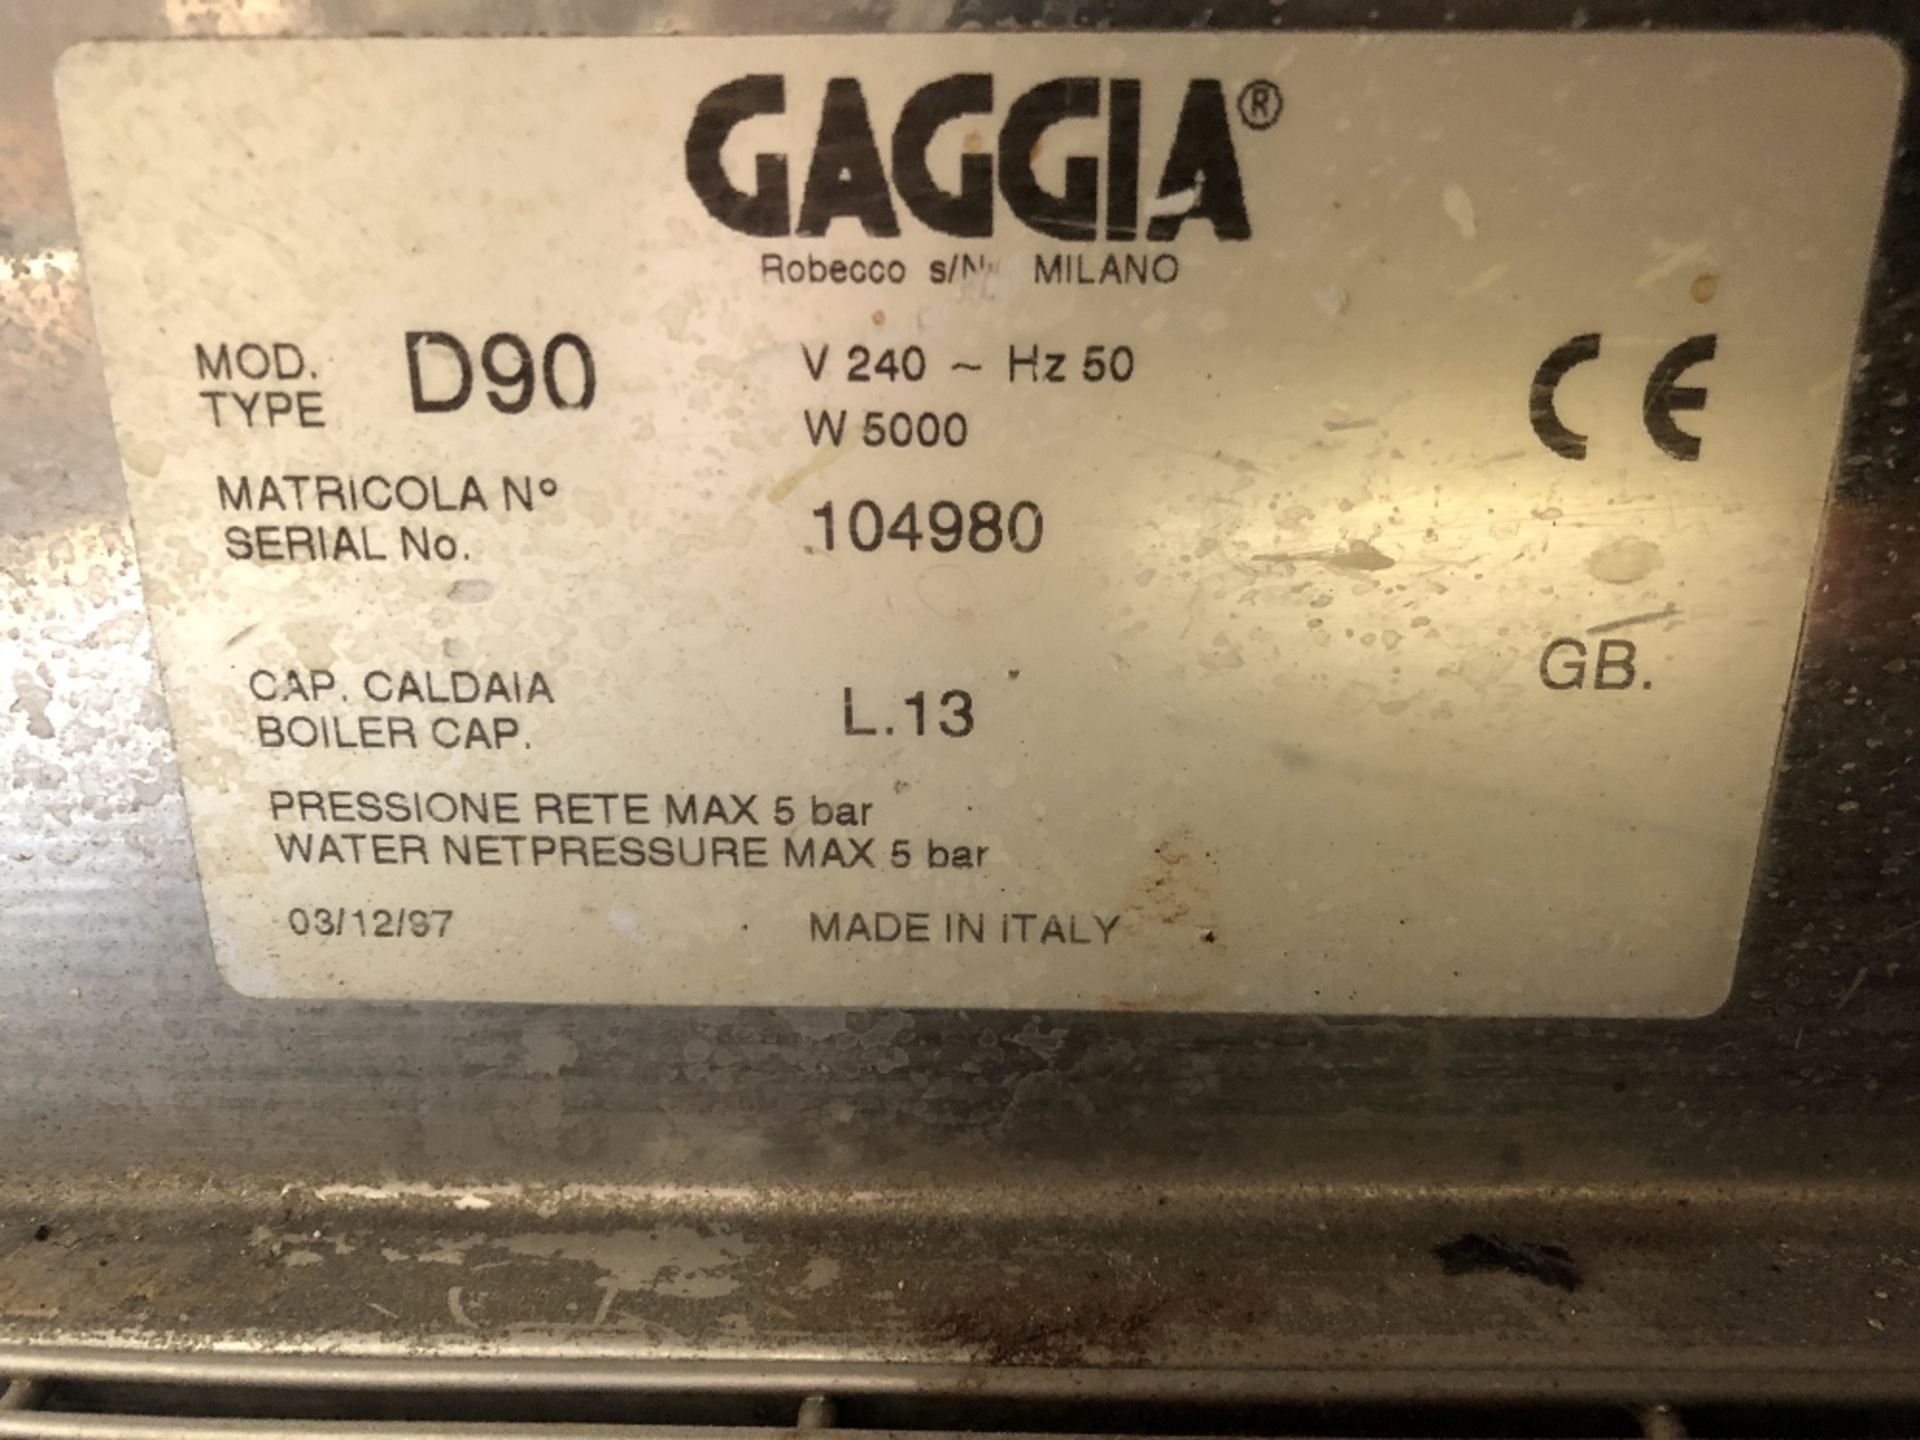 Gaggia D90 2 Group Commercial Coffee Machine - Image 3 of 3